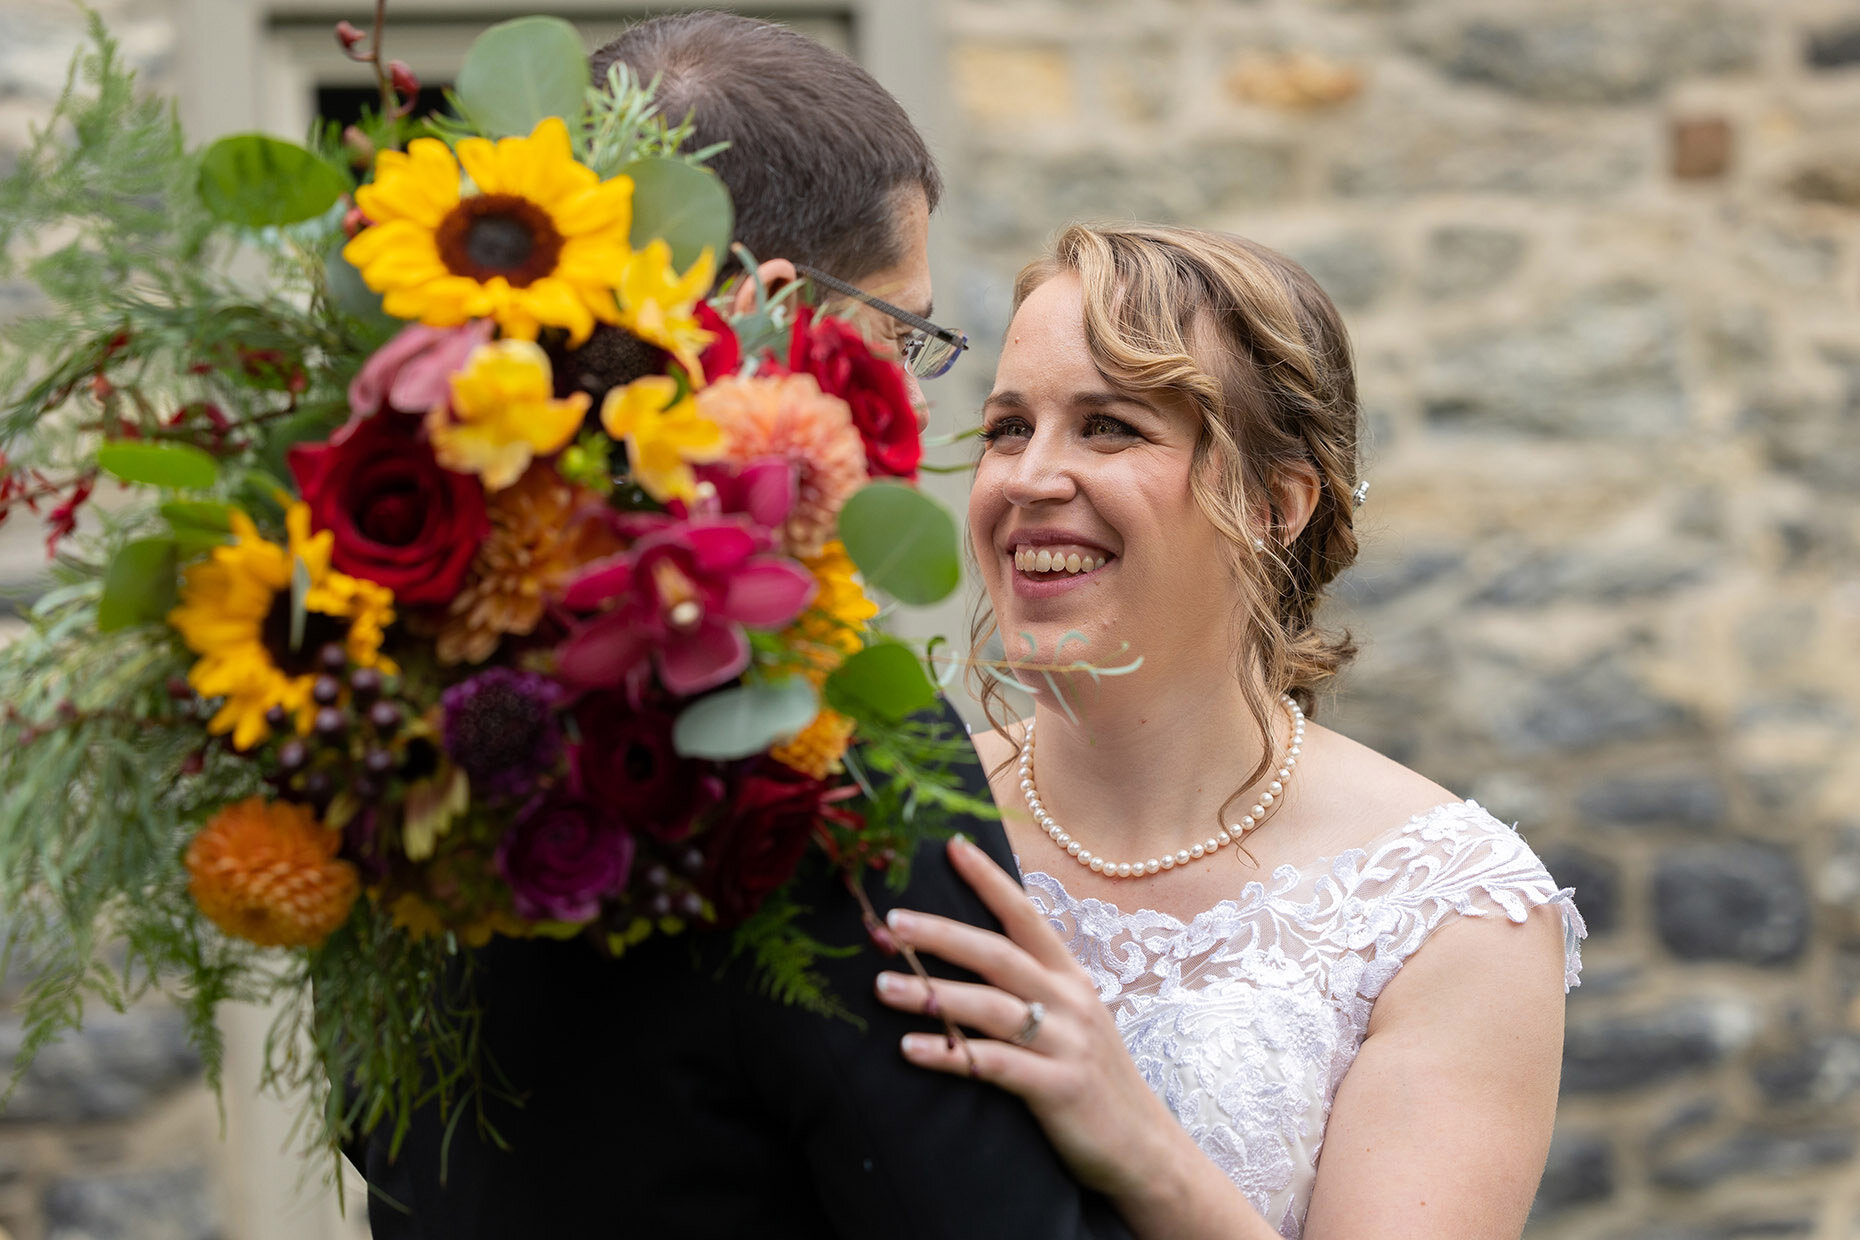 Bride smiling at groom during candid photo 